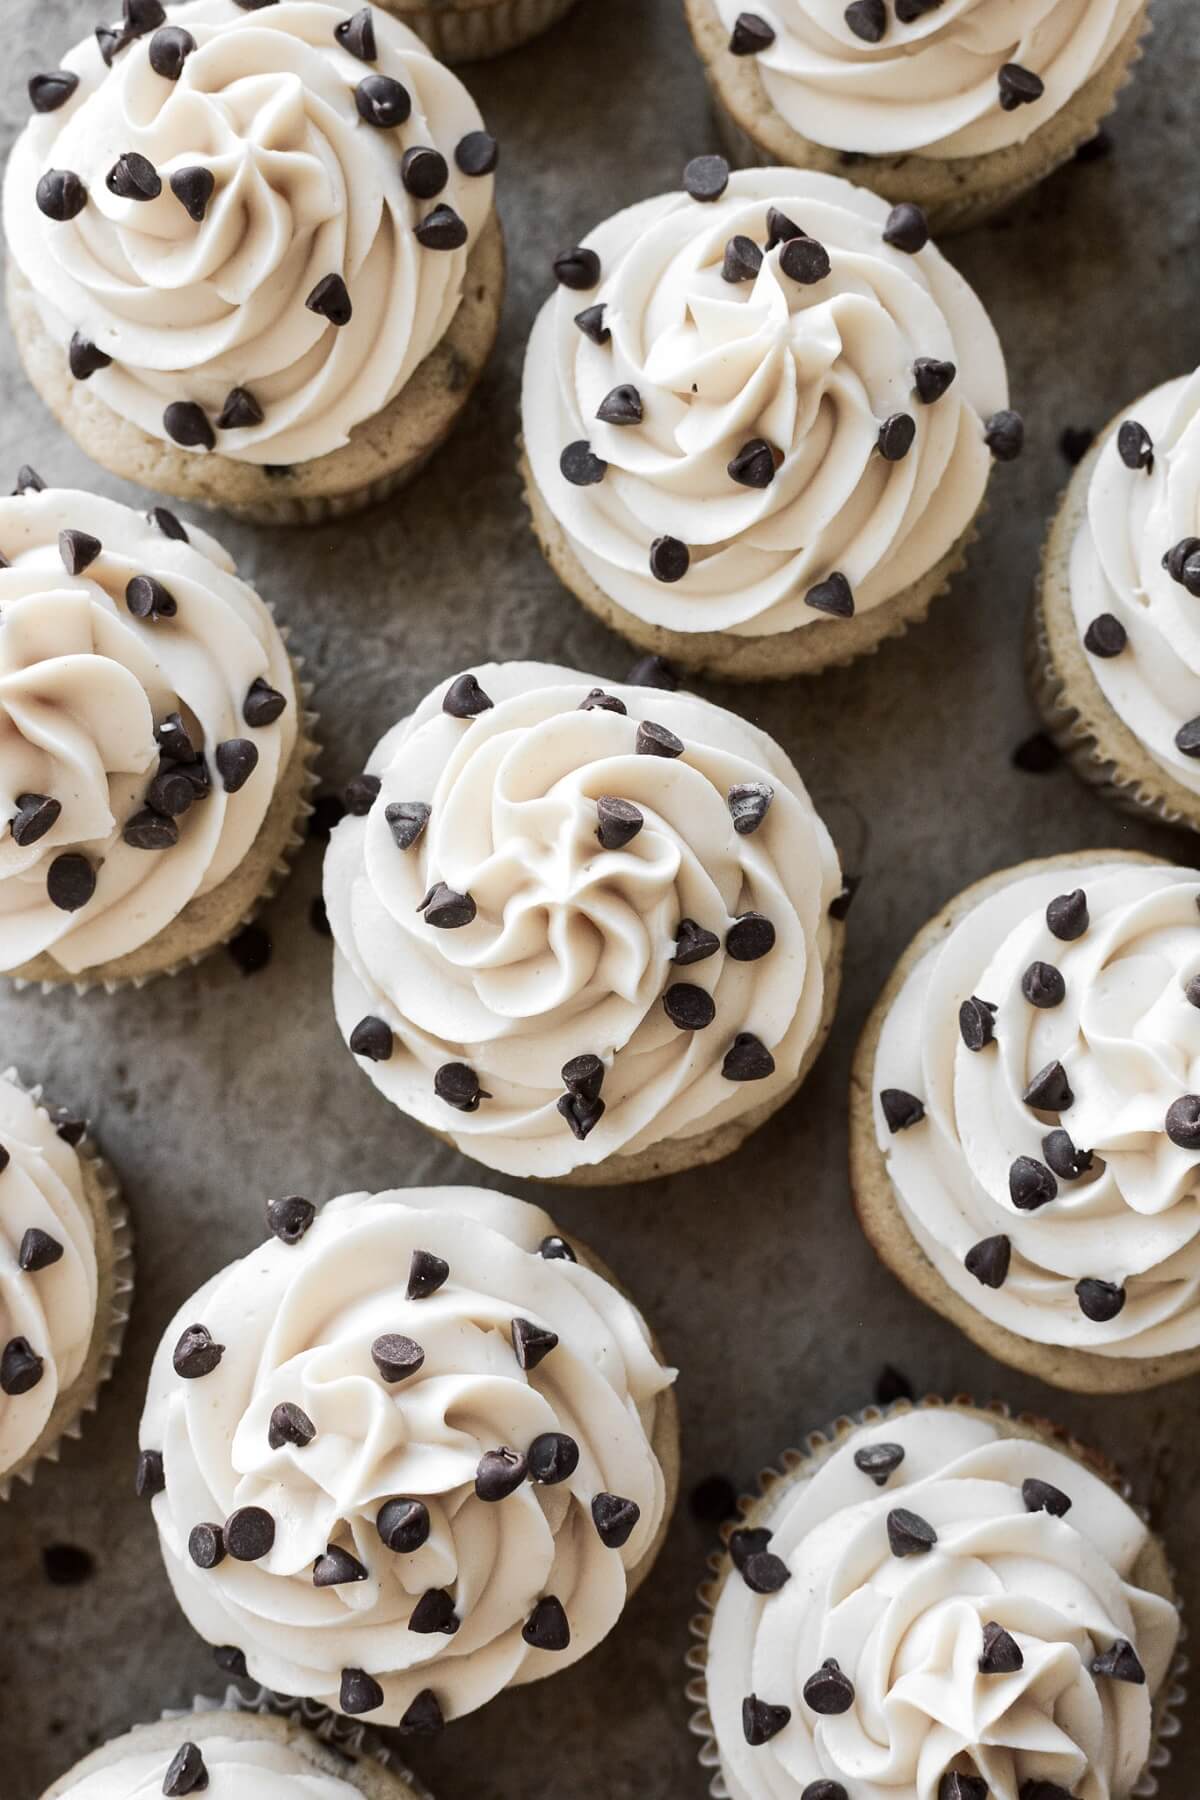 Mini chocolate chips sprinkled on top of cupcakes.